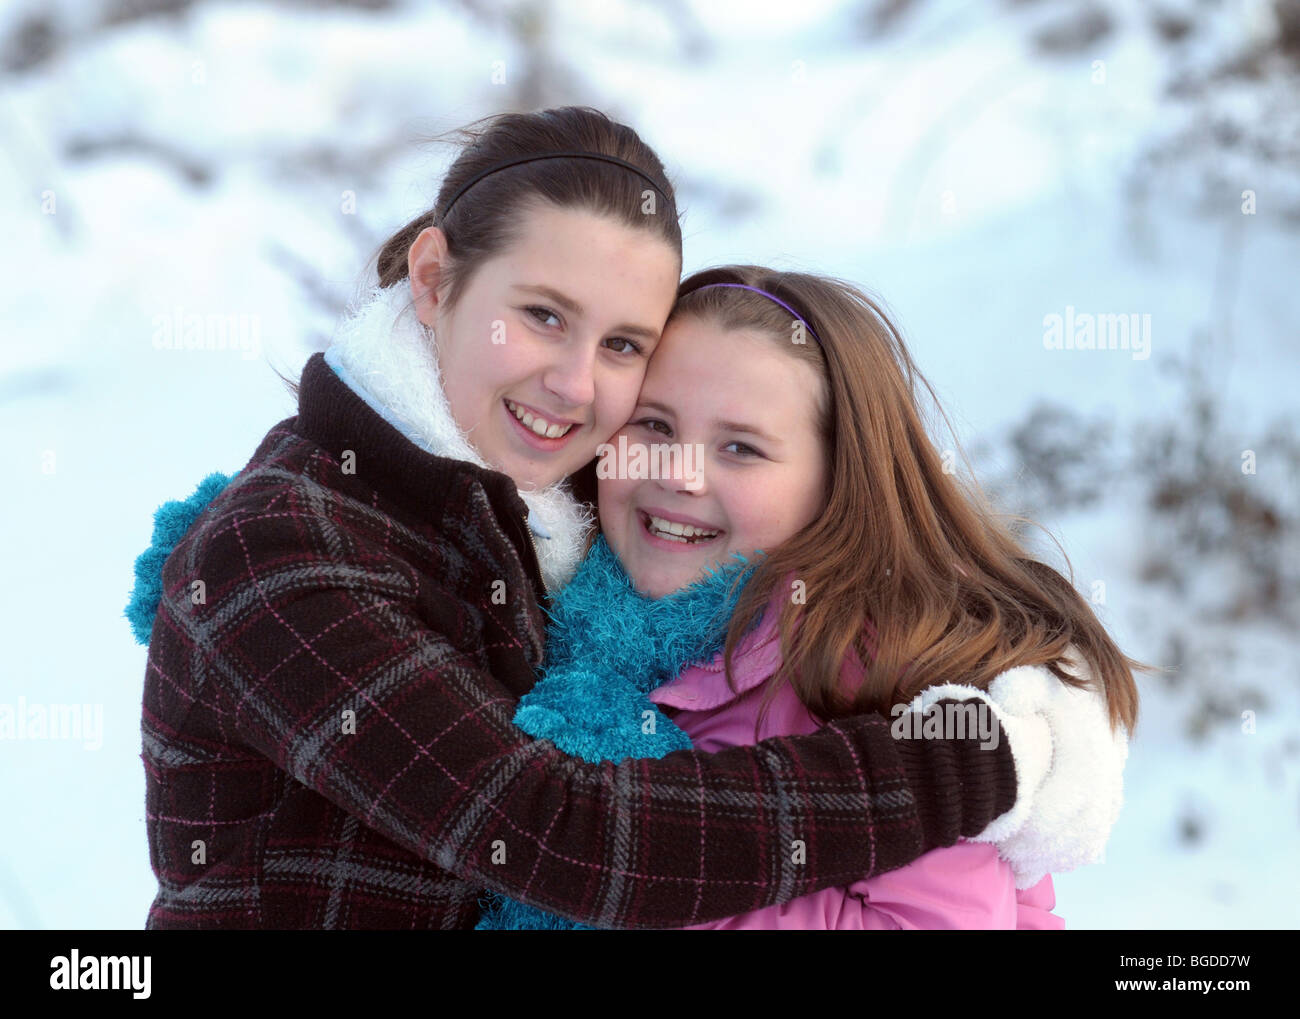 Sisters happily hugging out in cold weather Stock Photo